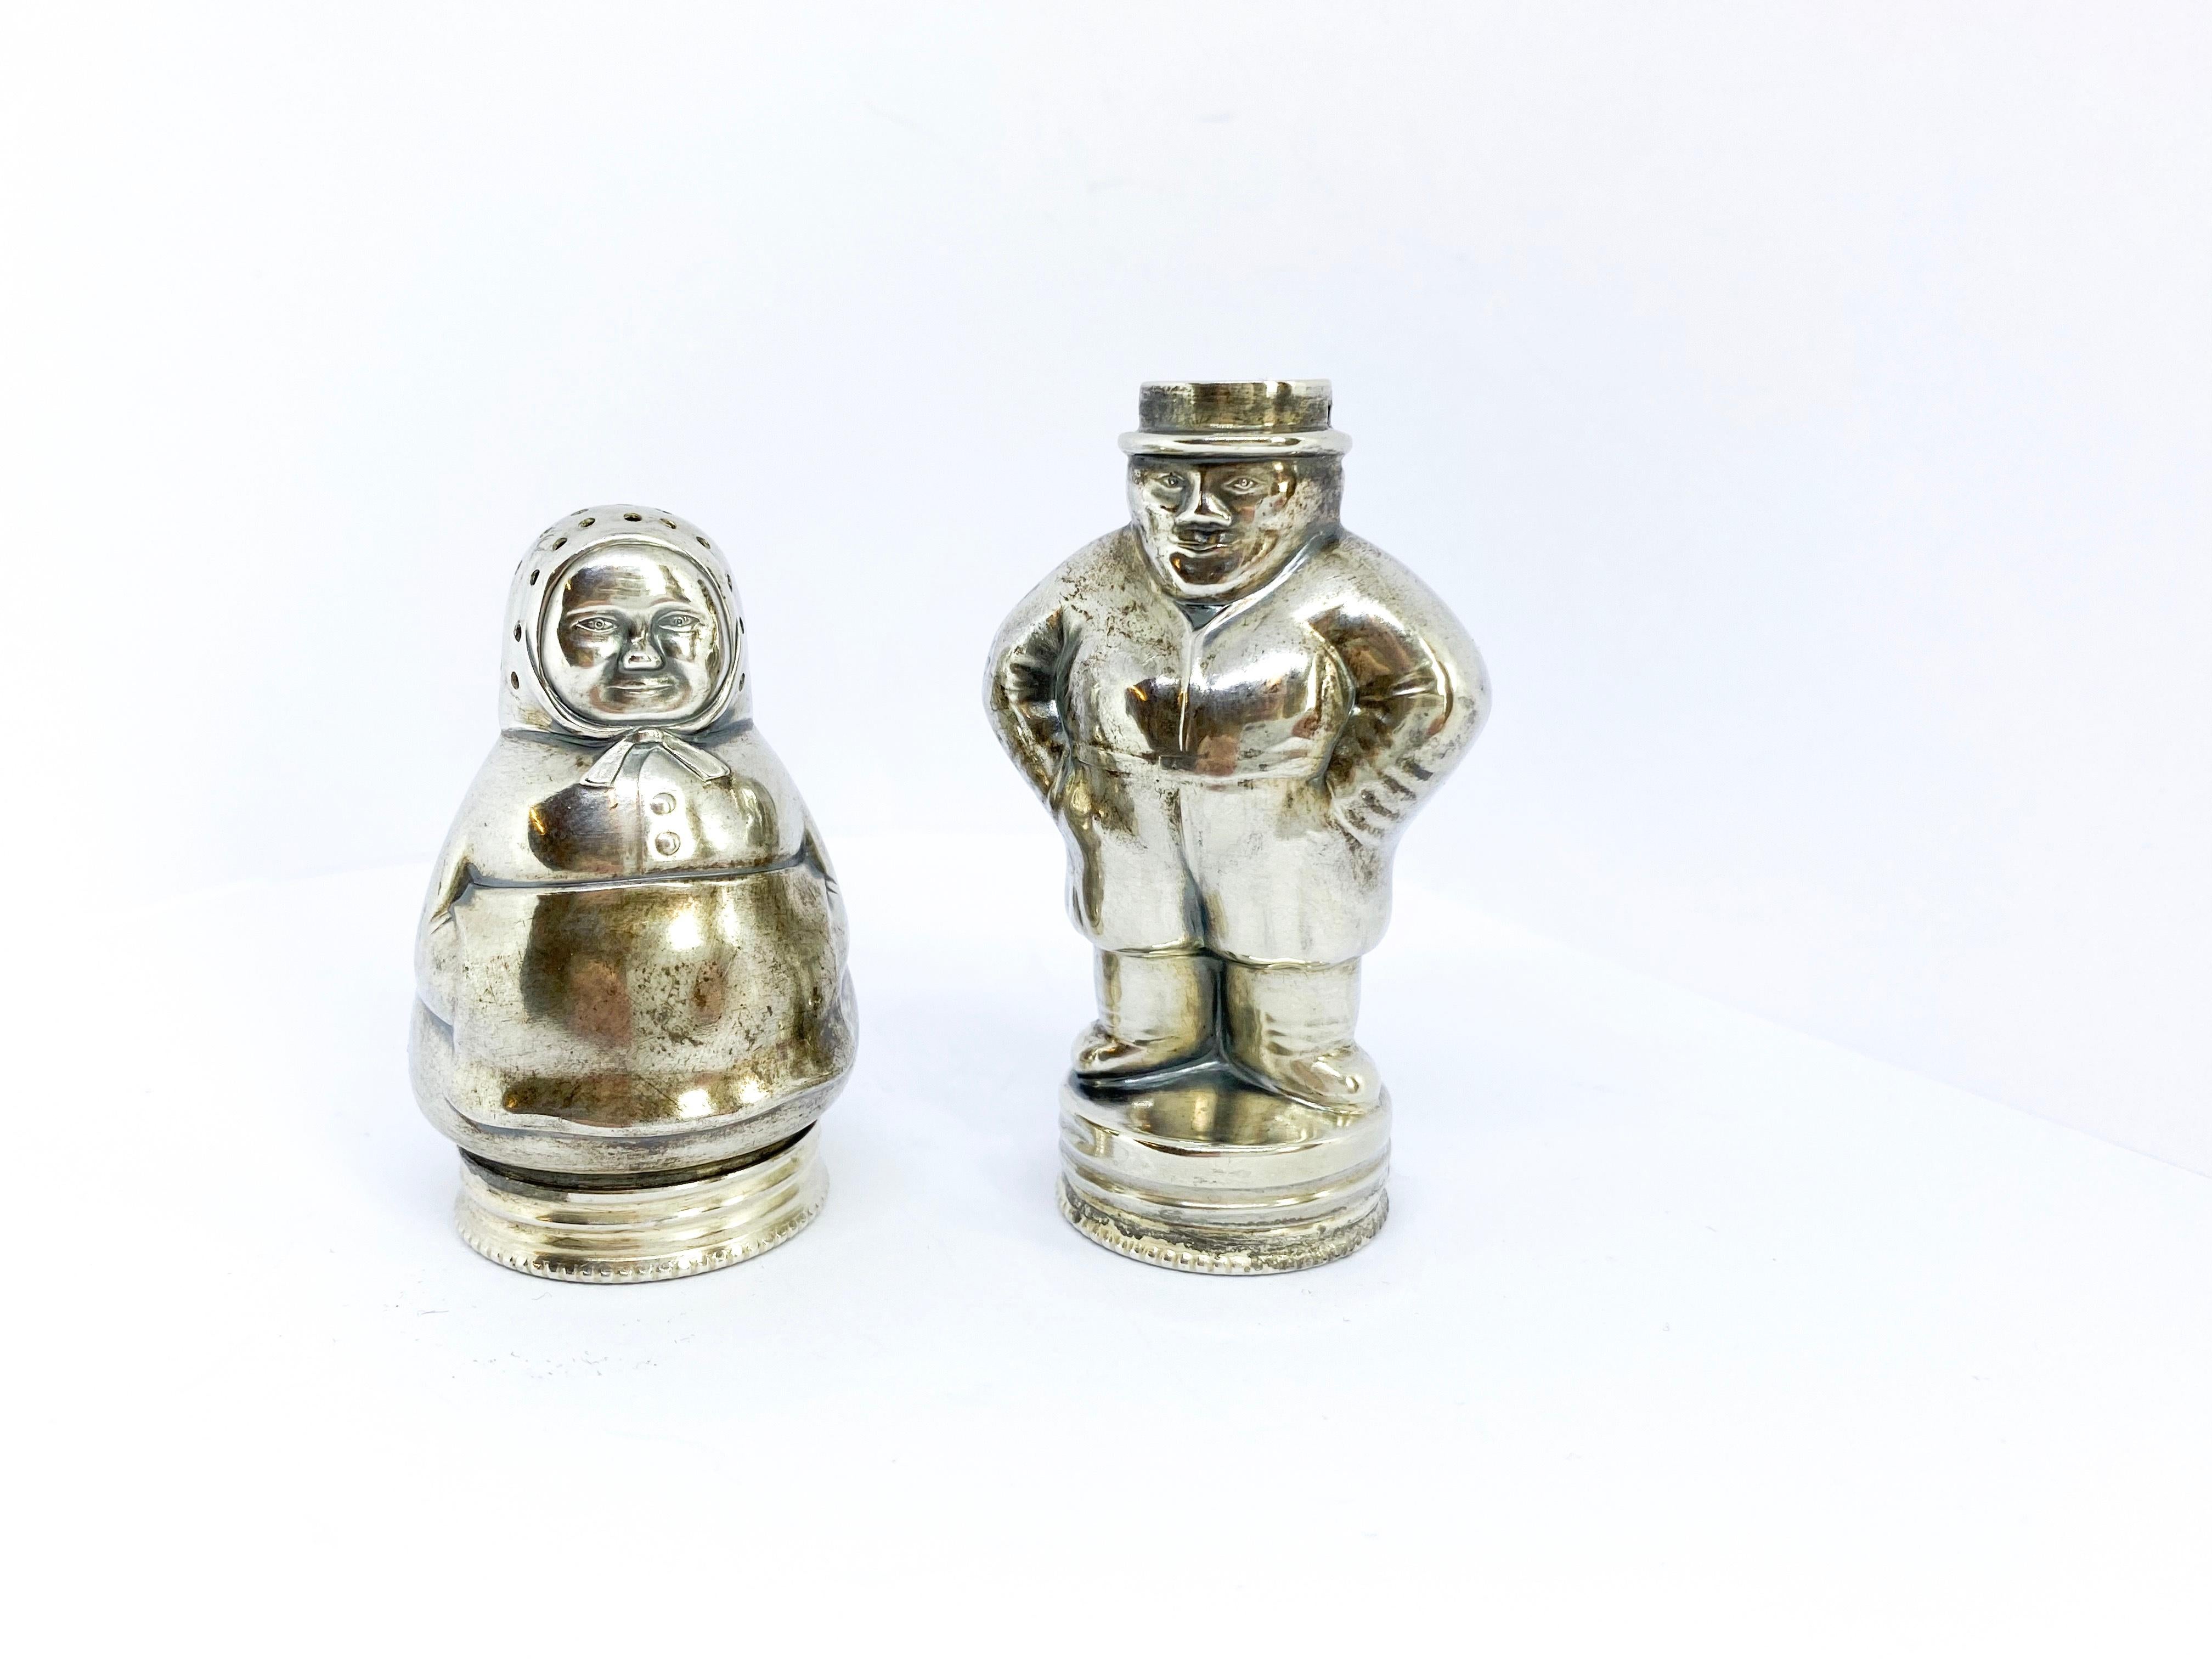 Retro Silver Salt and Pepper Shaker Finland 1977 and 1978